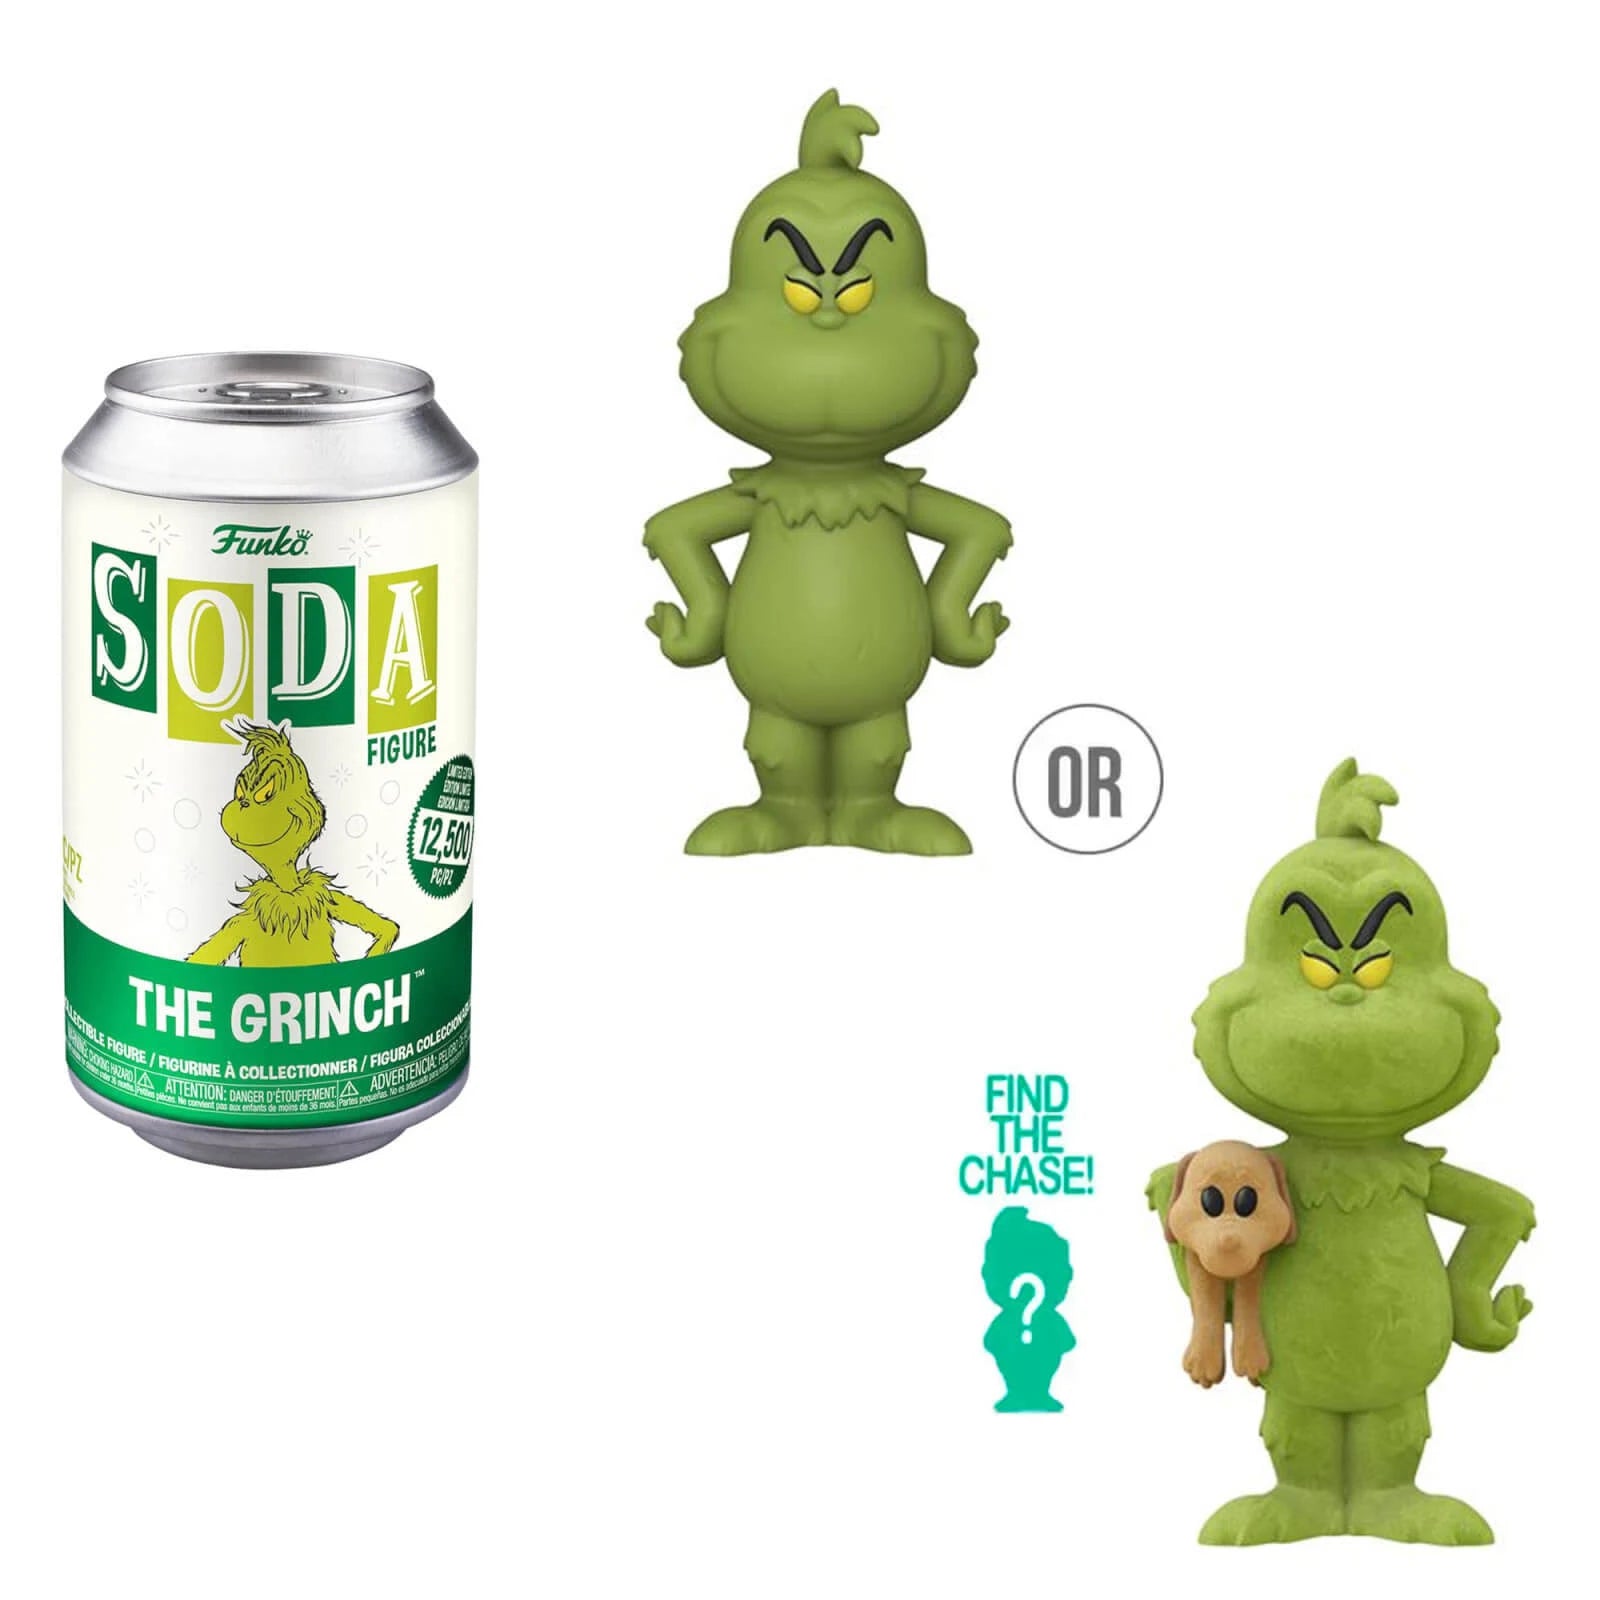 Funko Vinyl Soda Dr. Seuss: The Grinch Figure with Chance of Chase